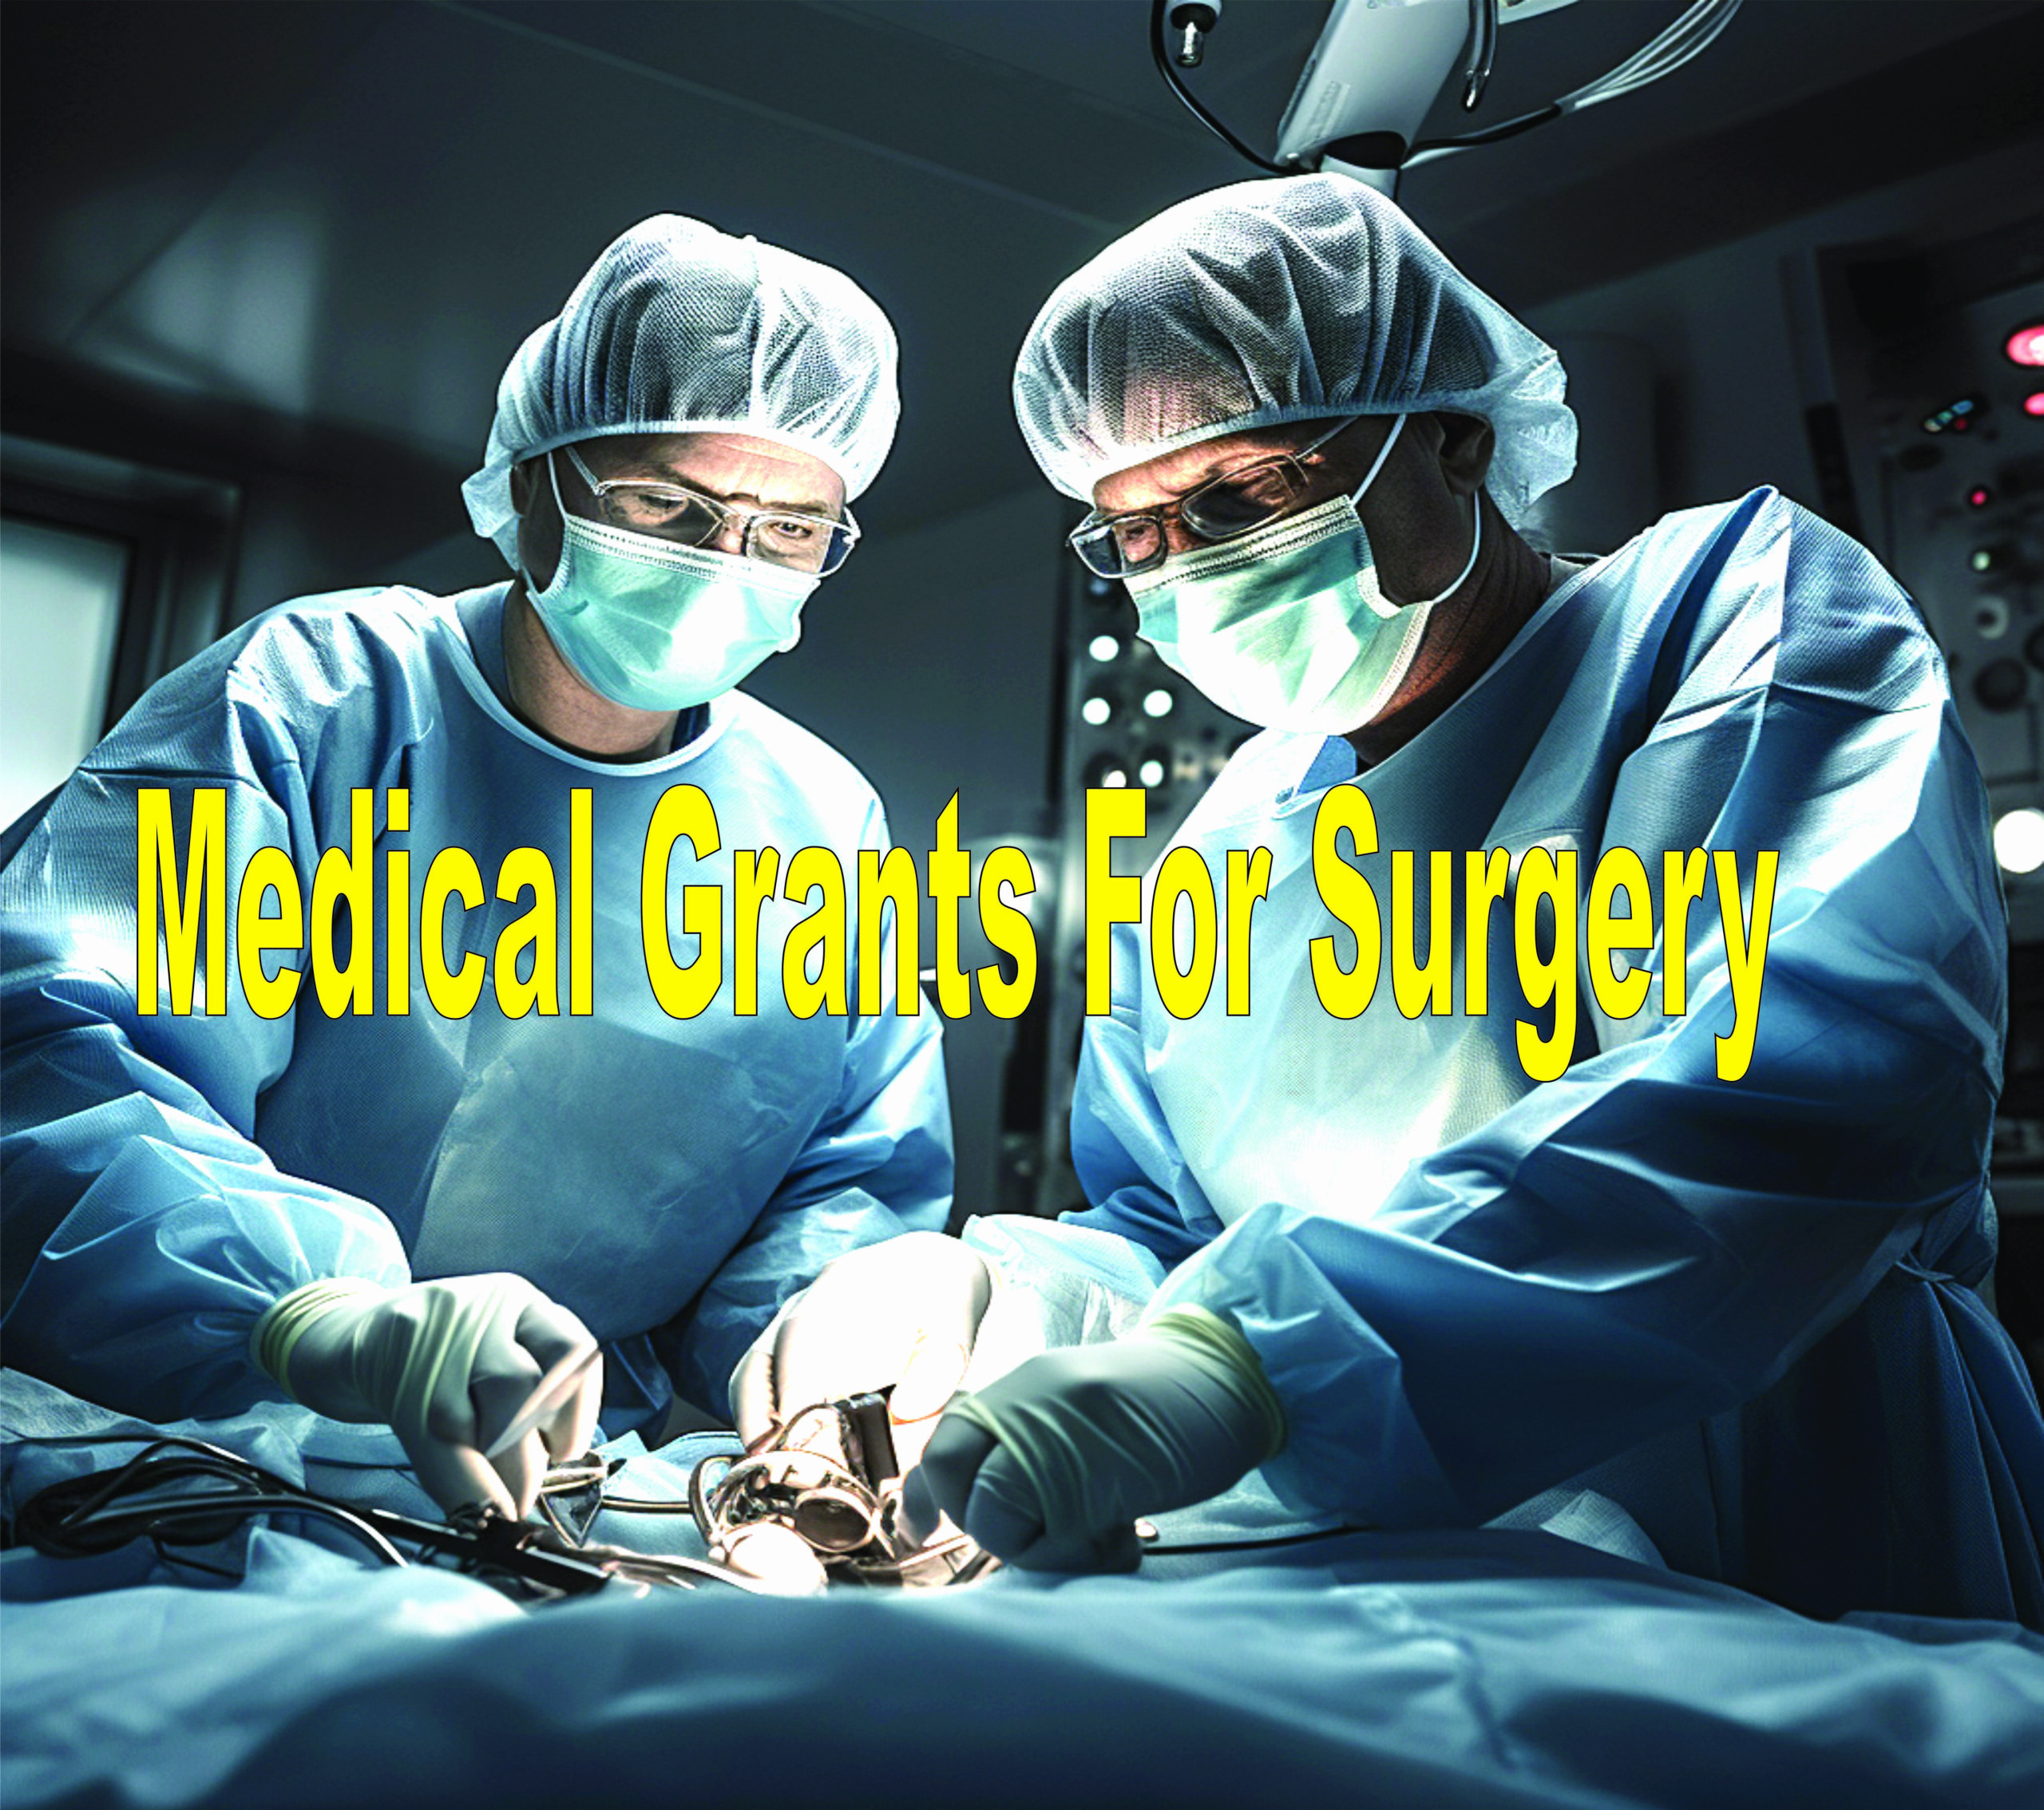 Medical Grants For Surgery